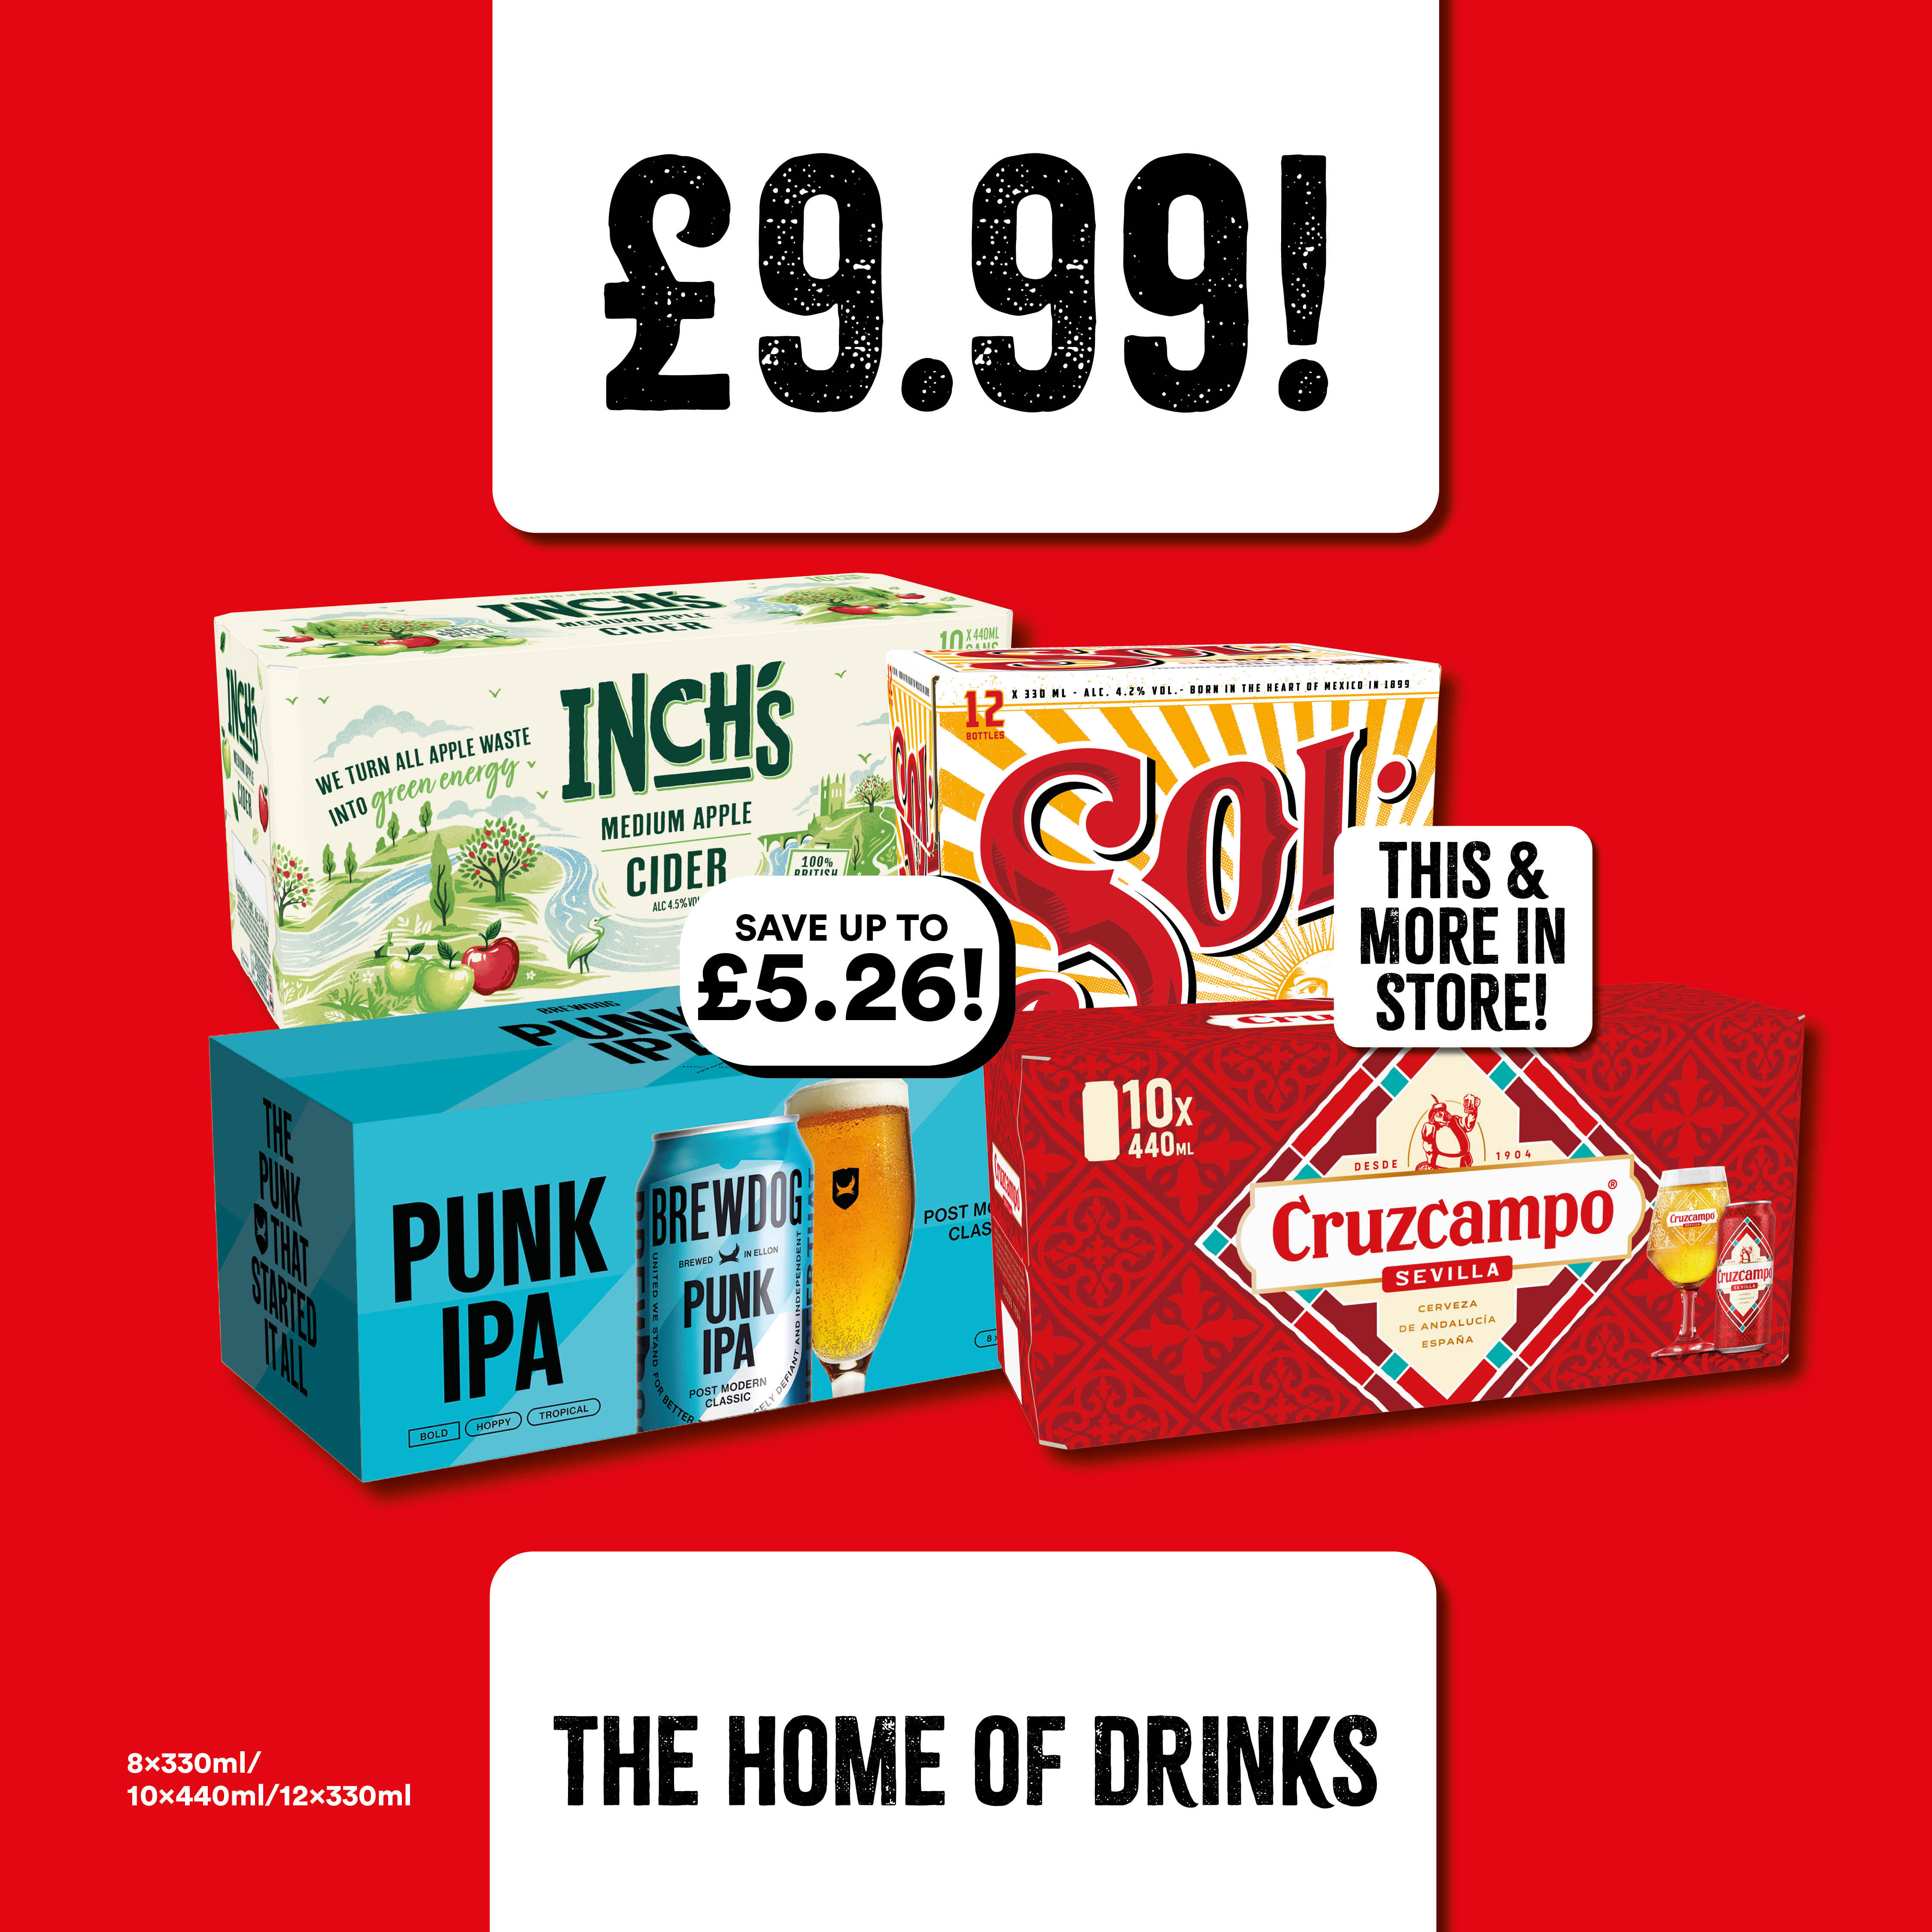 £9.99 on selected Beer and Lager packs Bargain Booze Select Convenience Leicester 01162 302553